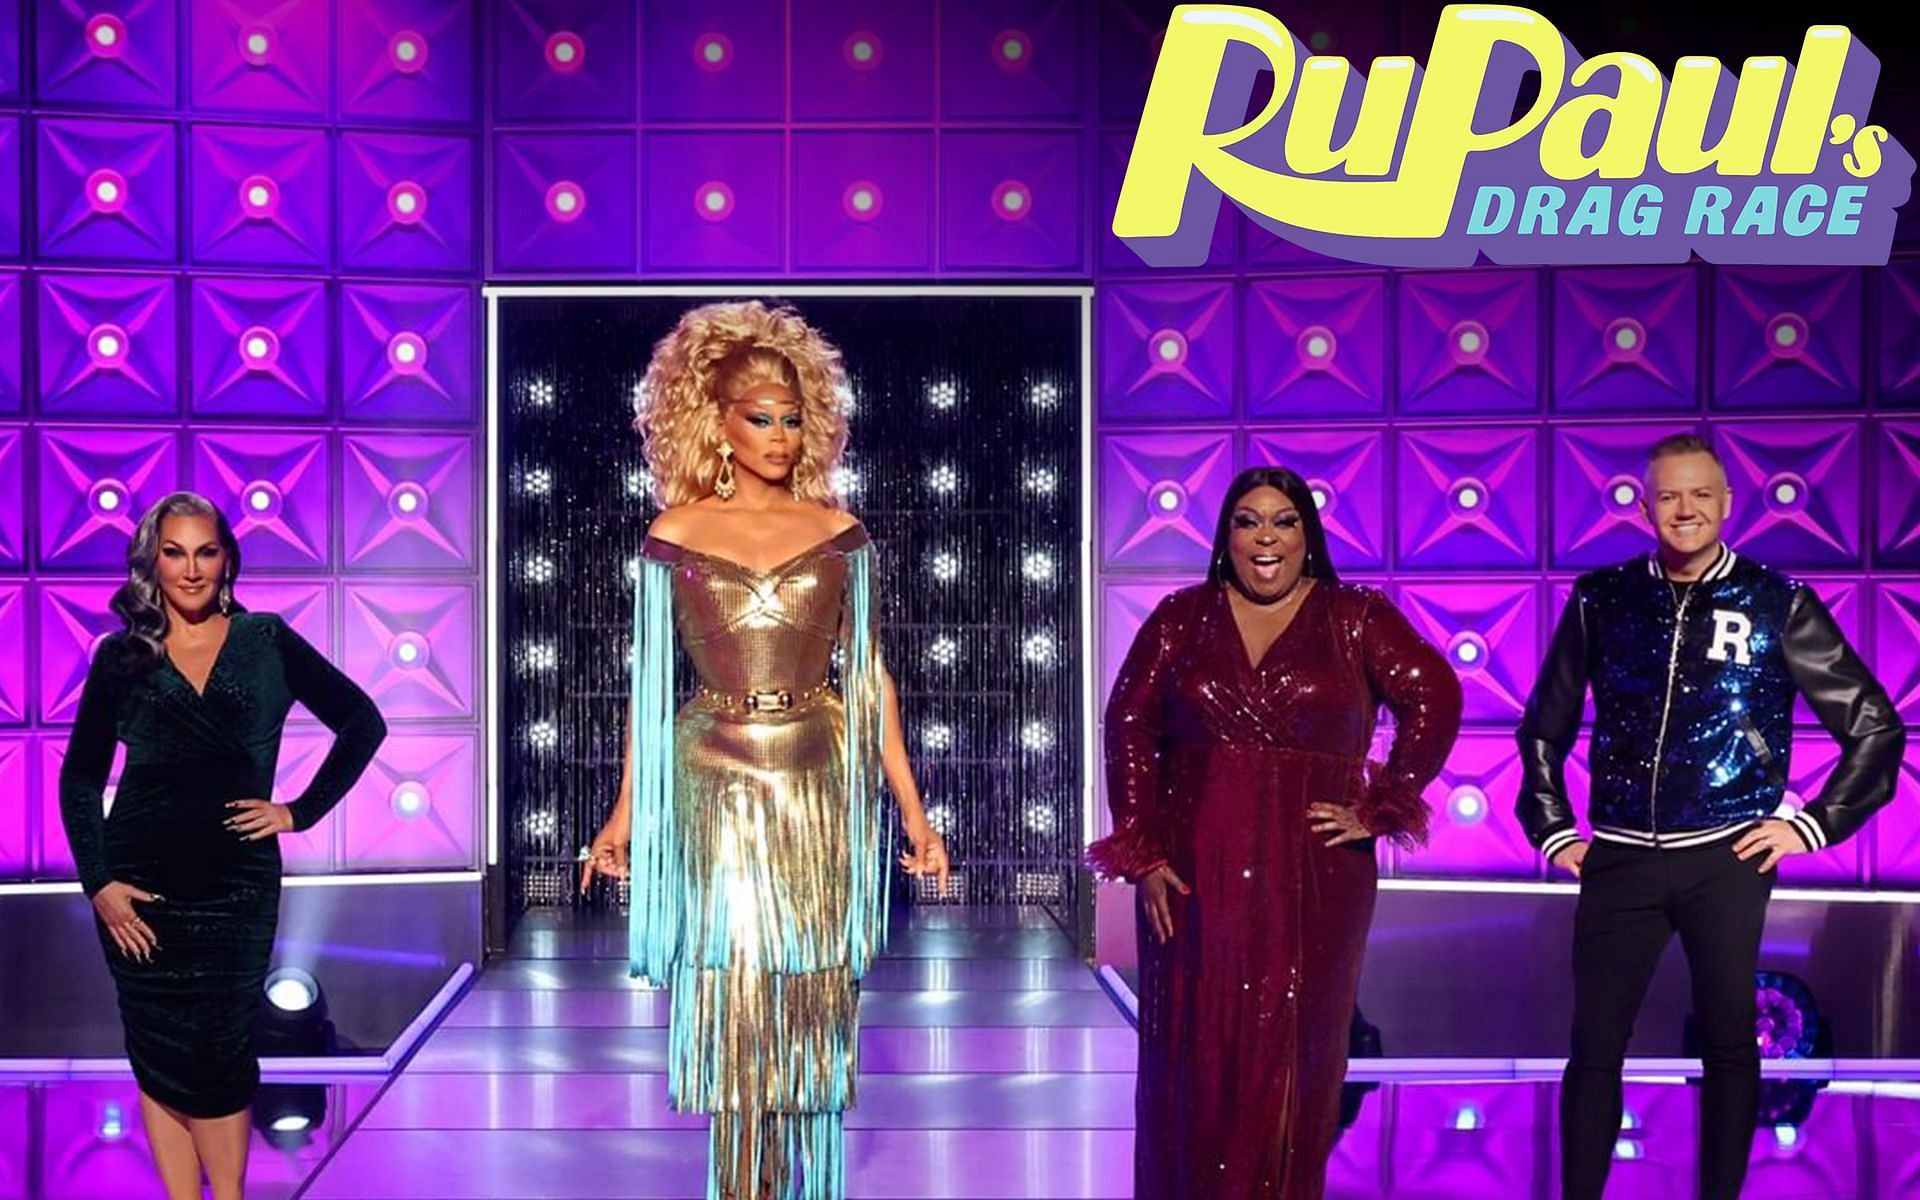 Episode 5 of RuPaul&rsquo;s Drag Race to air on February 4, 2022 at 8 p.m. ET on VH1 (Image via rupaulsdragrace)